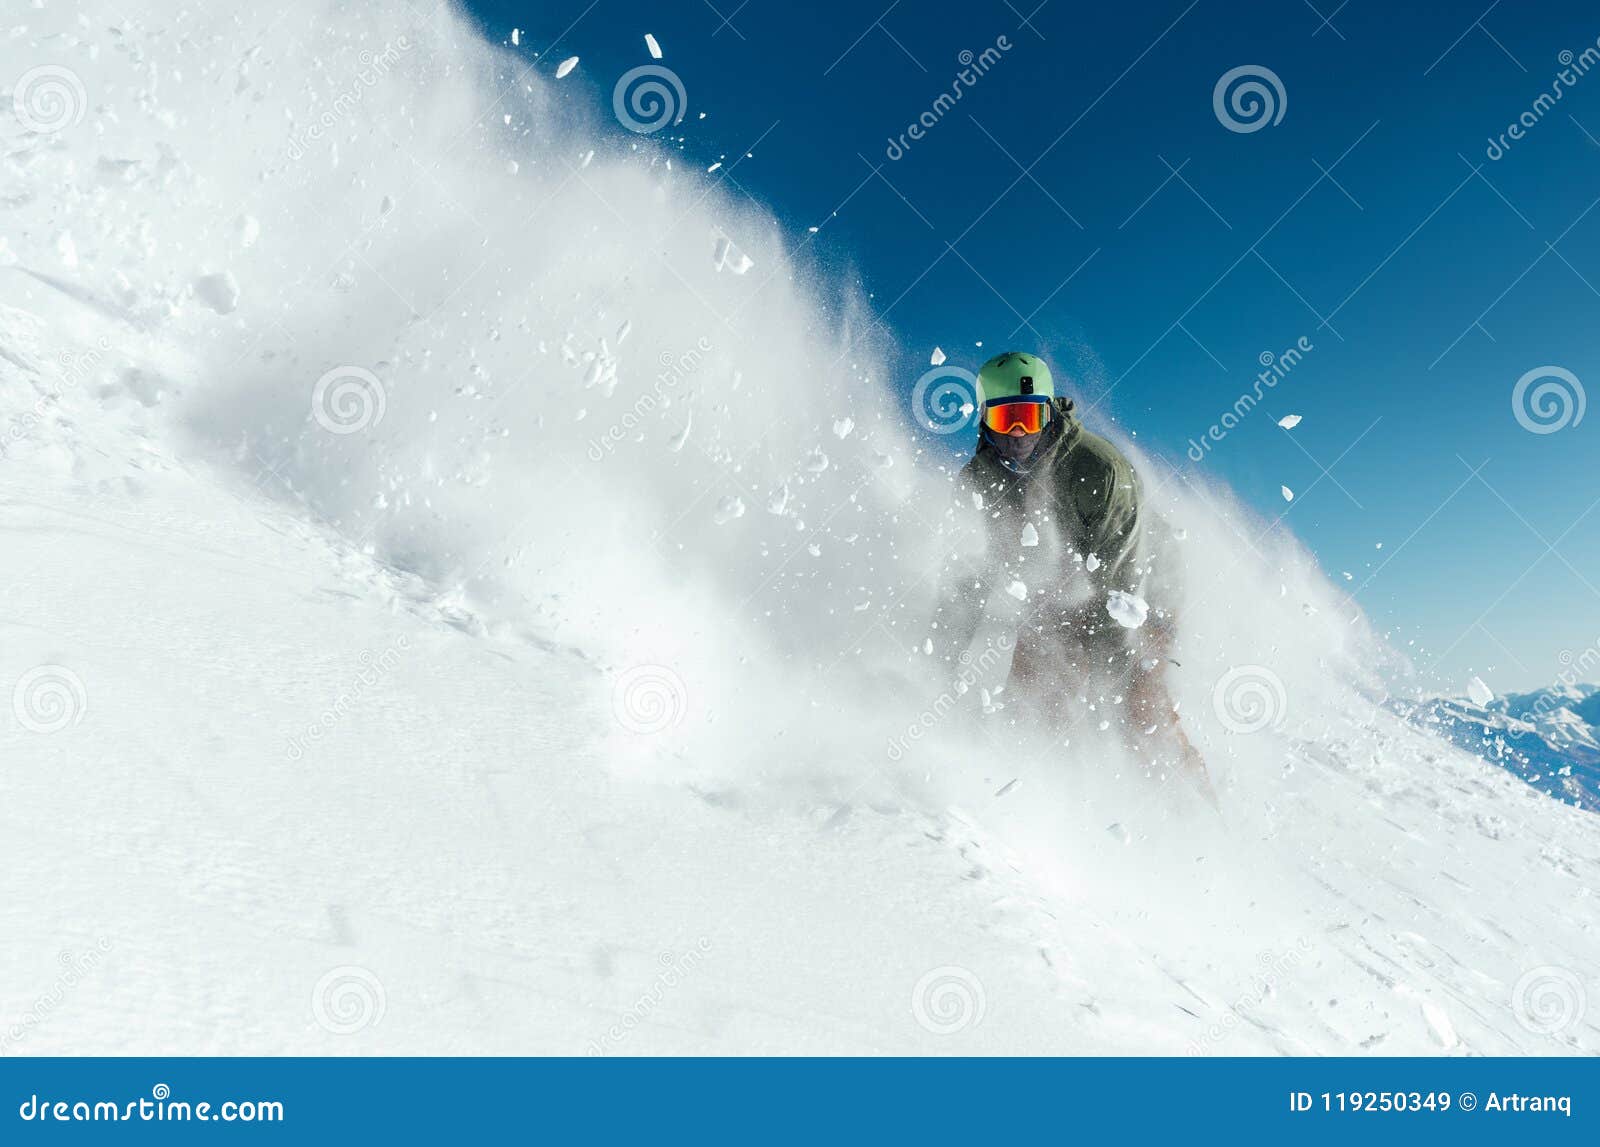 Man Snowboarder is Going Very Fast in Stream of Snow Avalanche Stock Image 